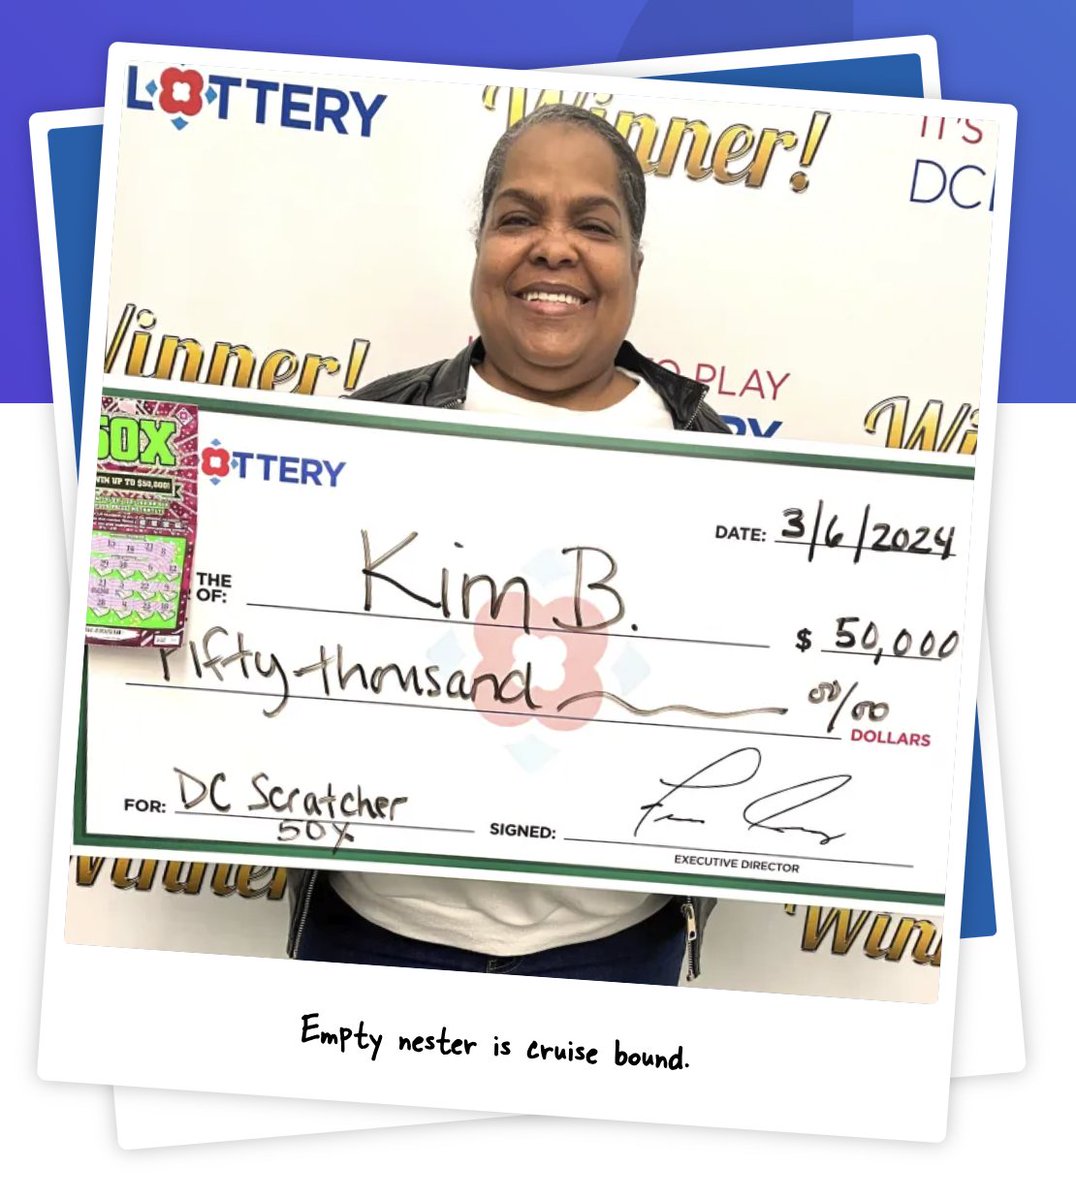 DC Lottery player Kim B. is ready to set sail with her winnings! 🛳️ Taking home the $50,000 top prize with the 50X DC Scratcher, the empty nester is ready to hit the open seas and enjoy a nice cruise! ☀️ See more winners here #WinnerSpotlight: bit.ly/3UkYx9M